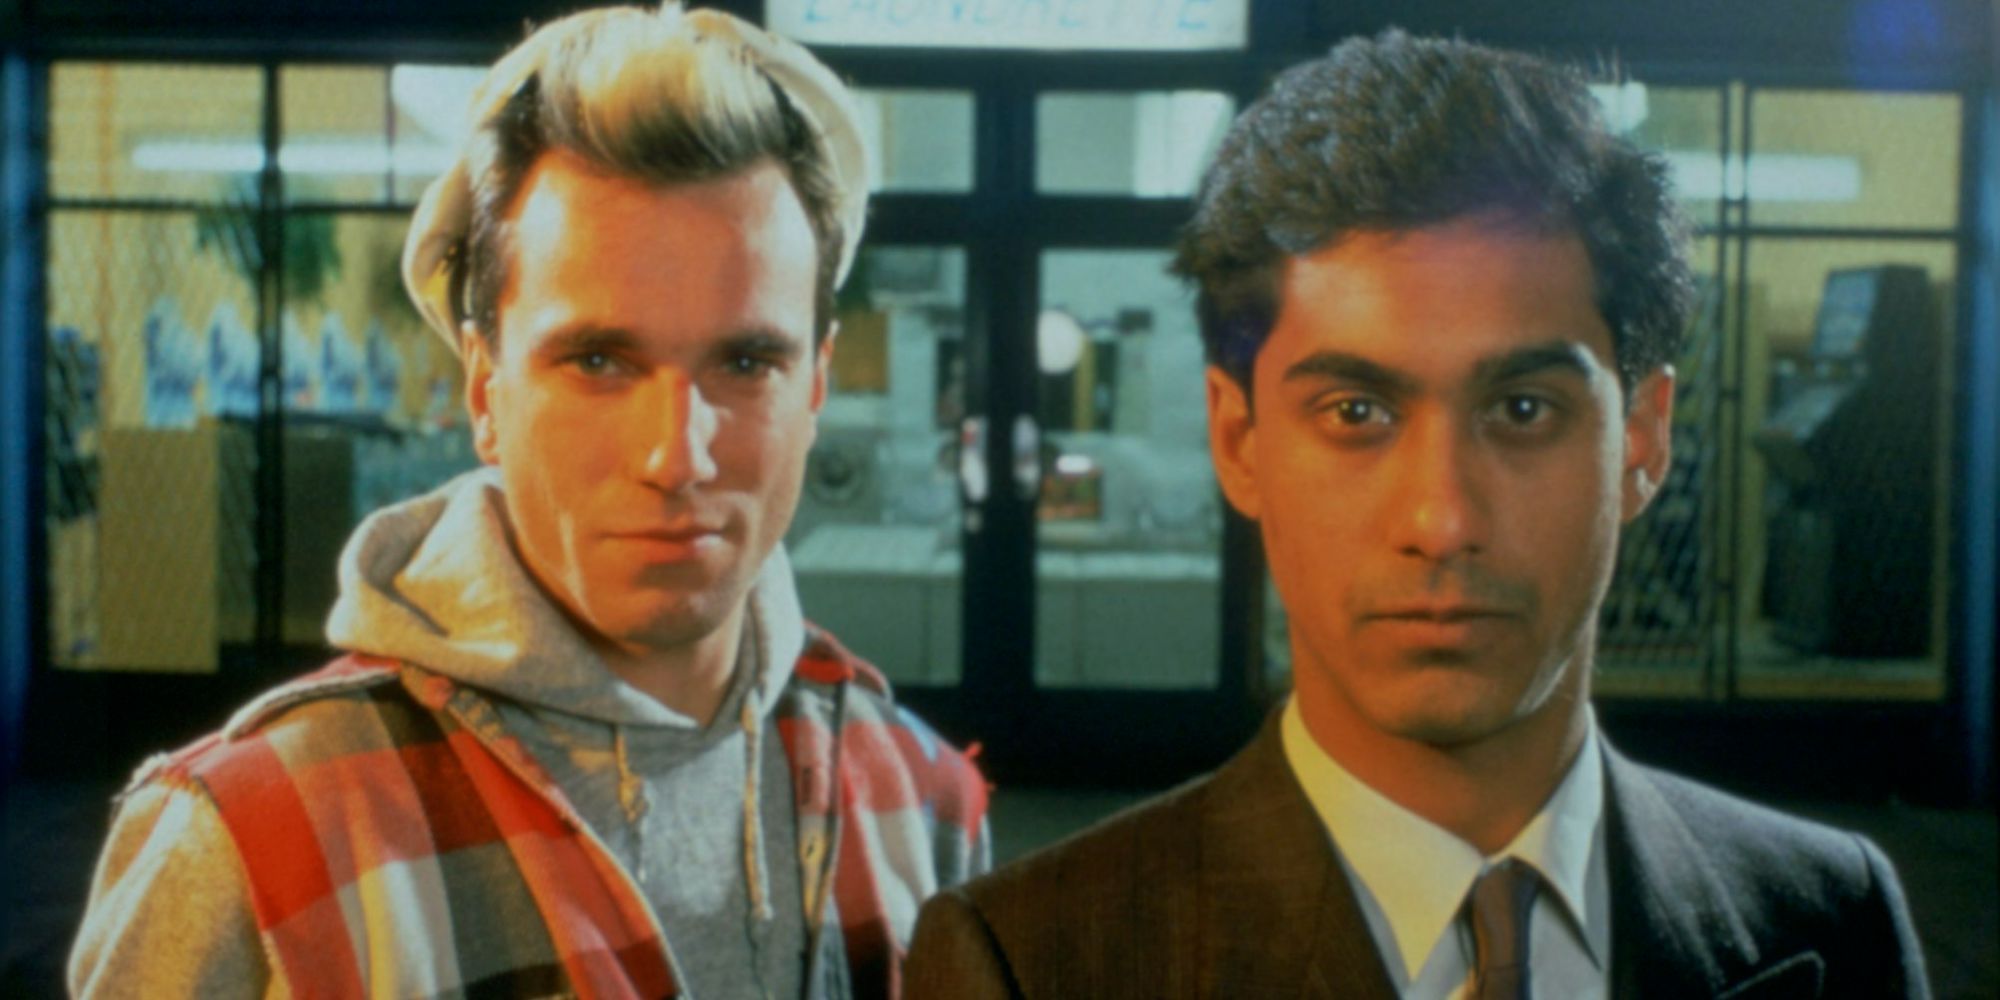 Closeup of Daniel Day-Lewis and his costar in My Beautiful Laundrette